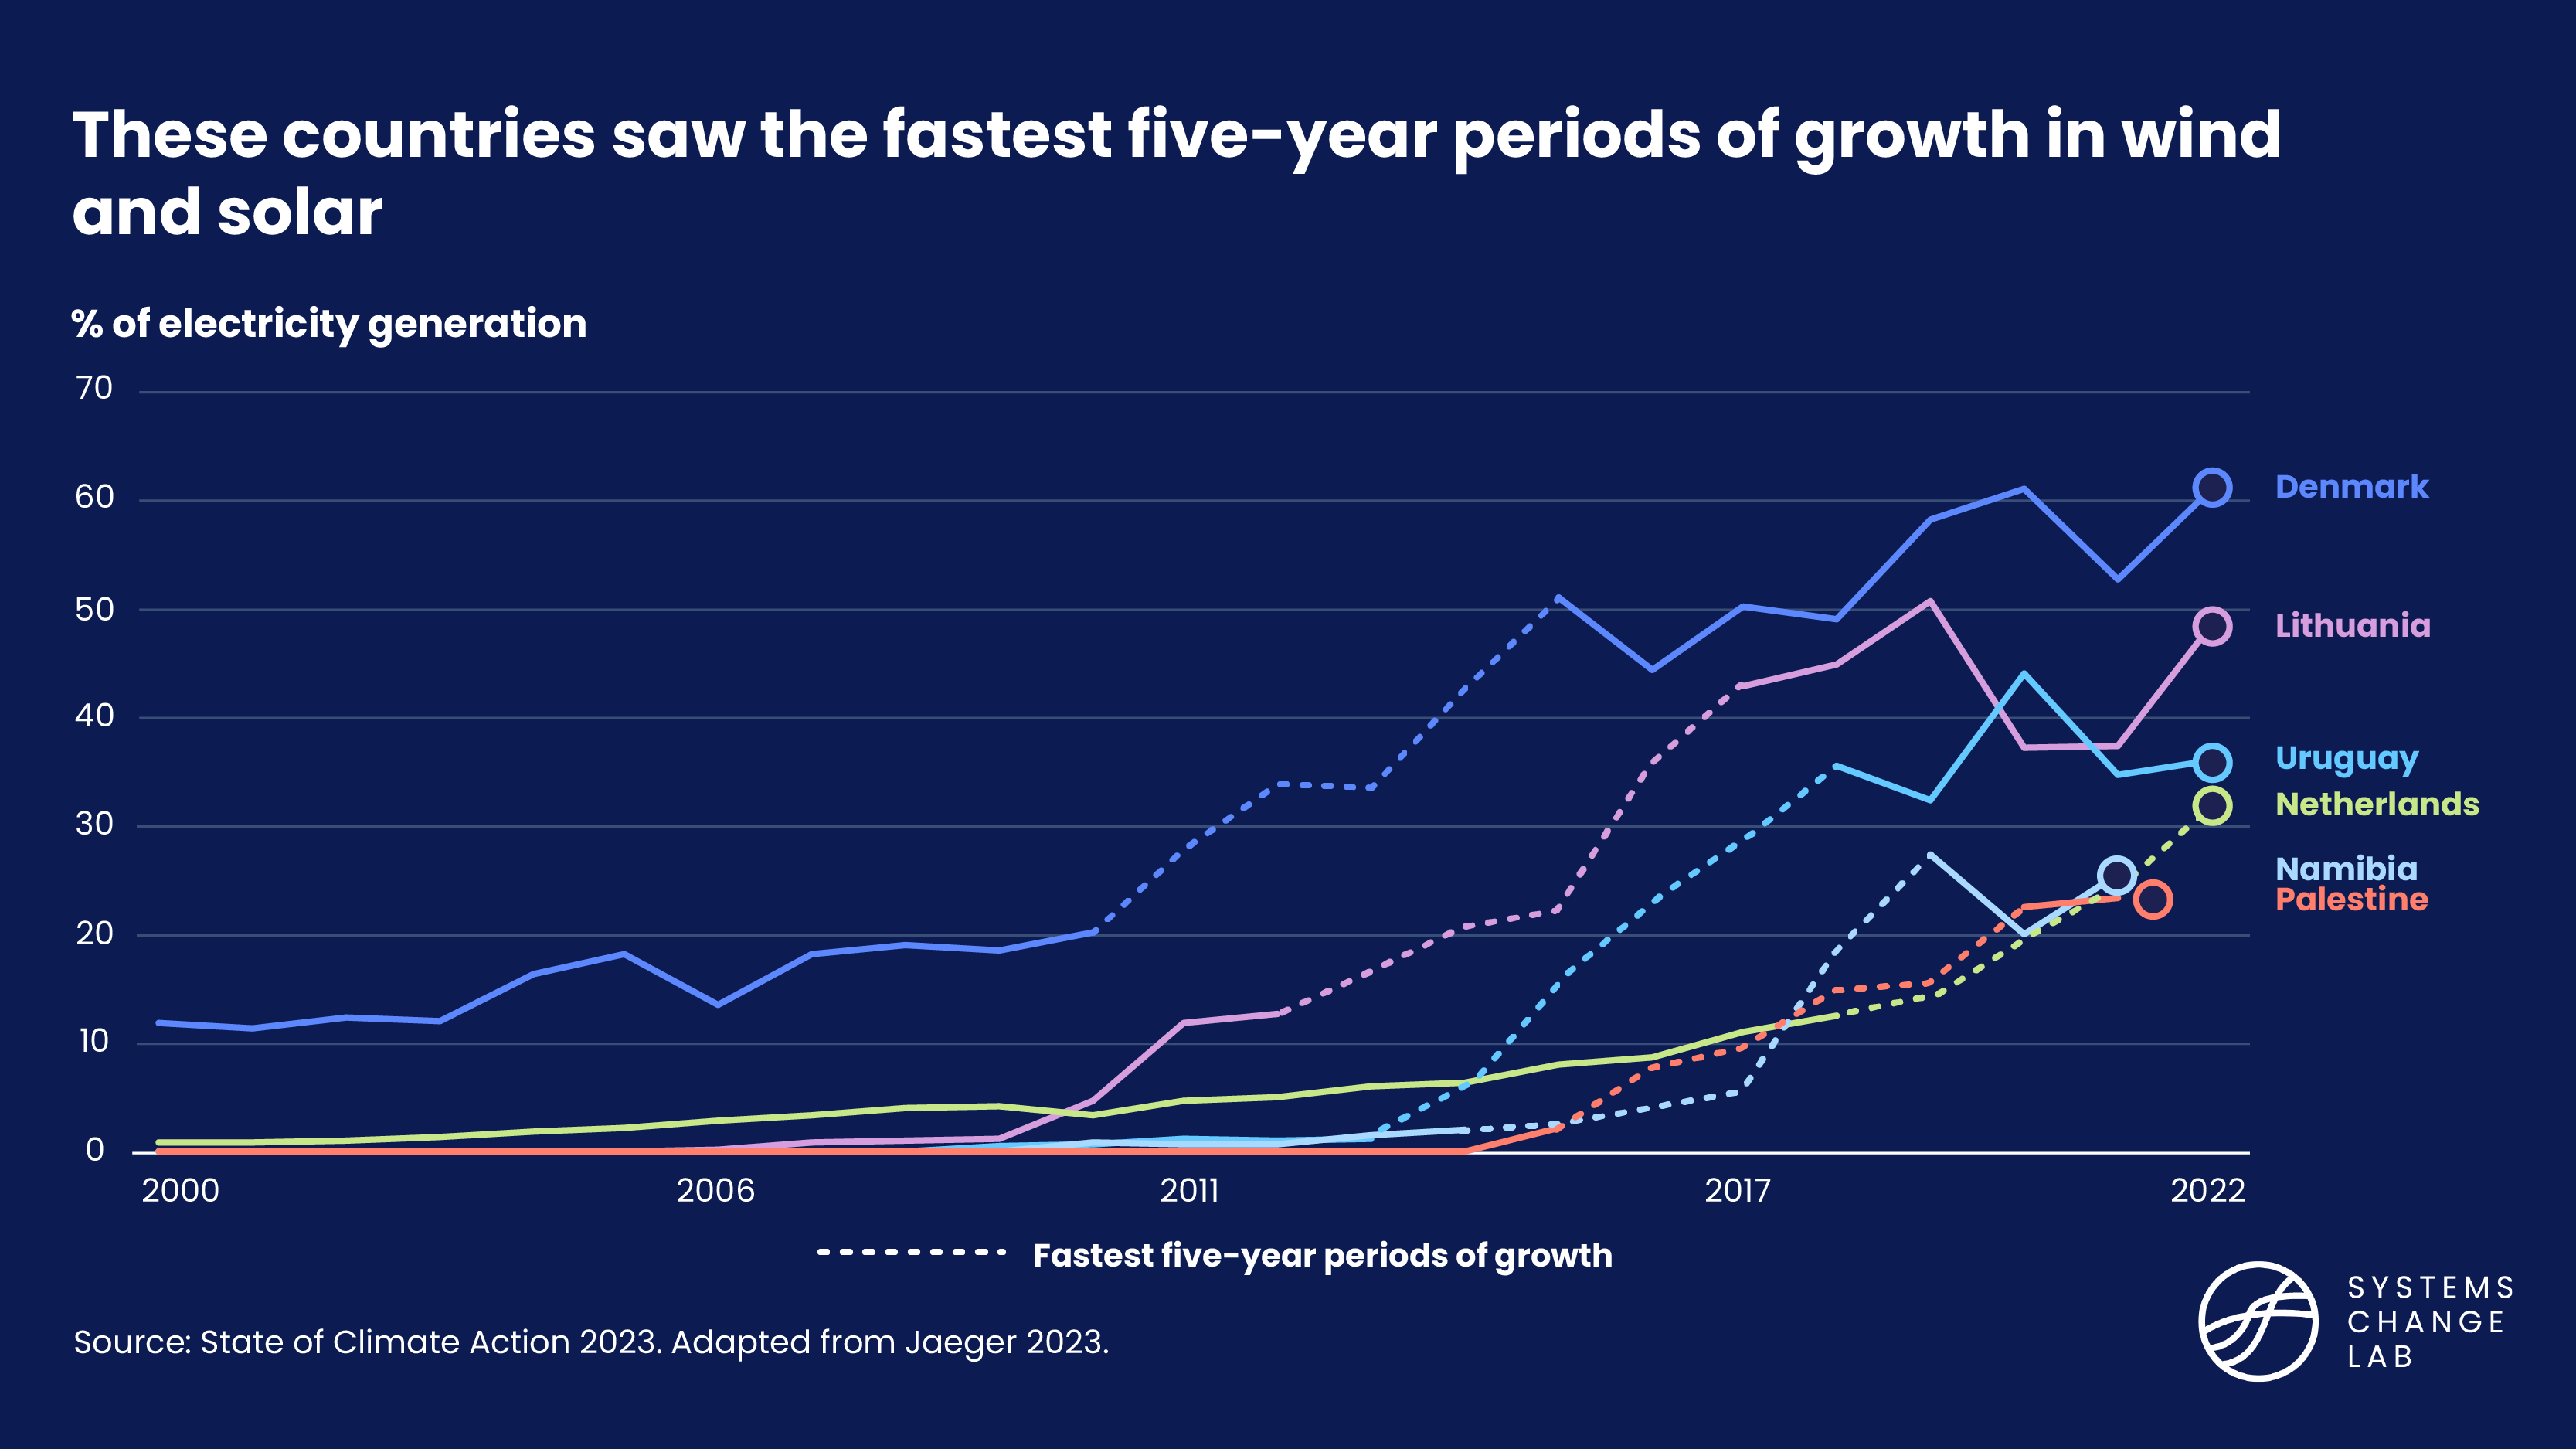 These countries saw the fastest five-year periods of growth in wind and solar